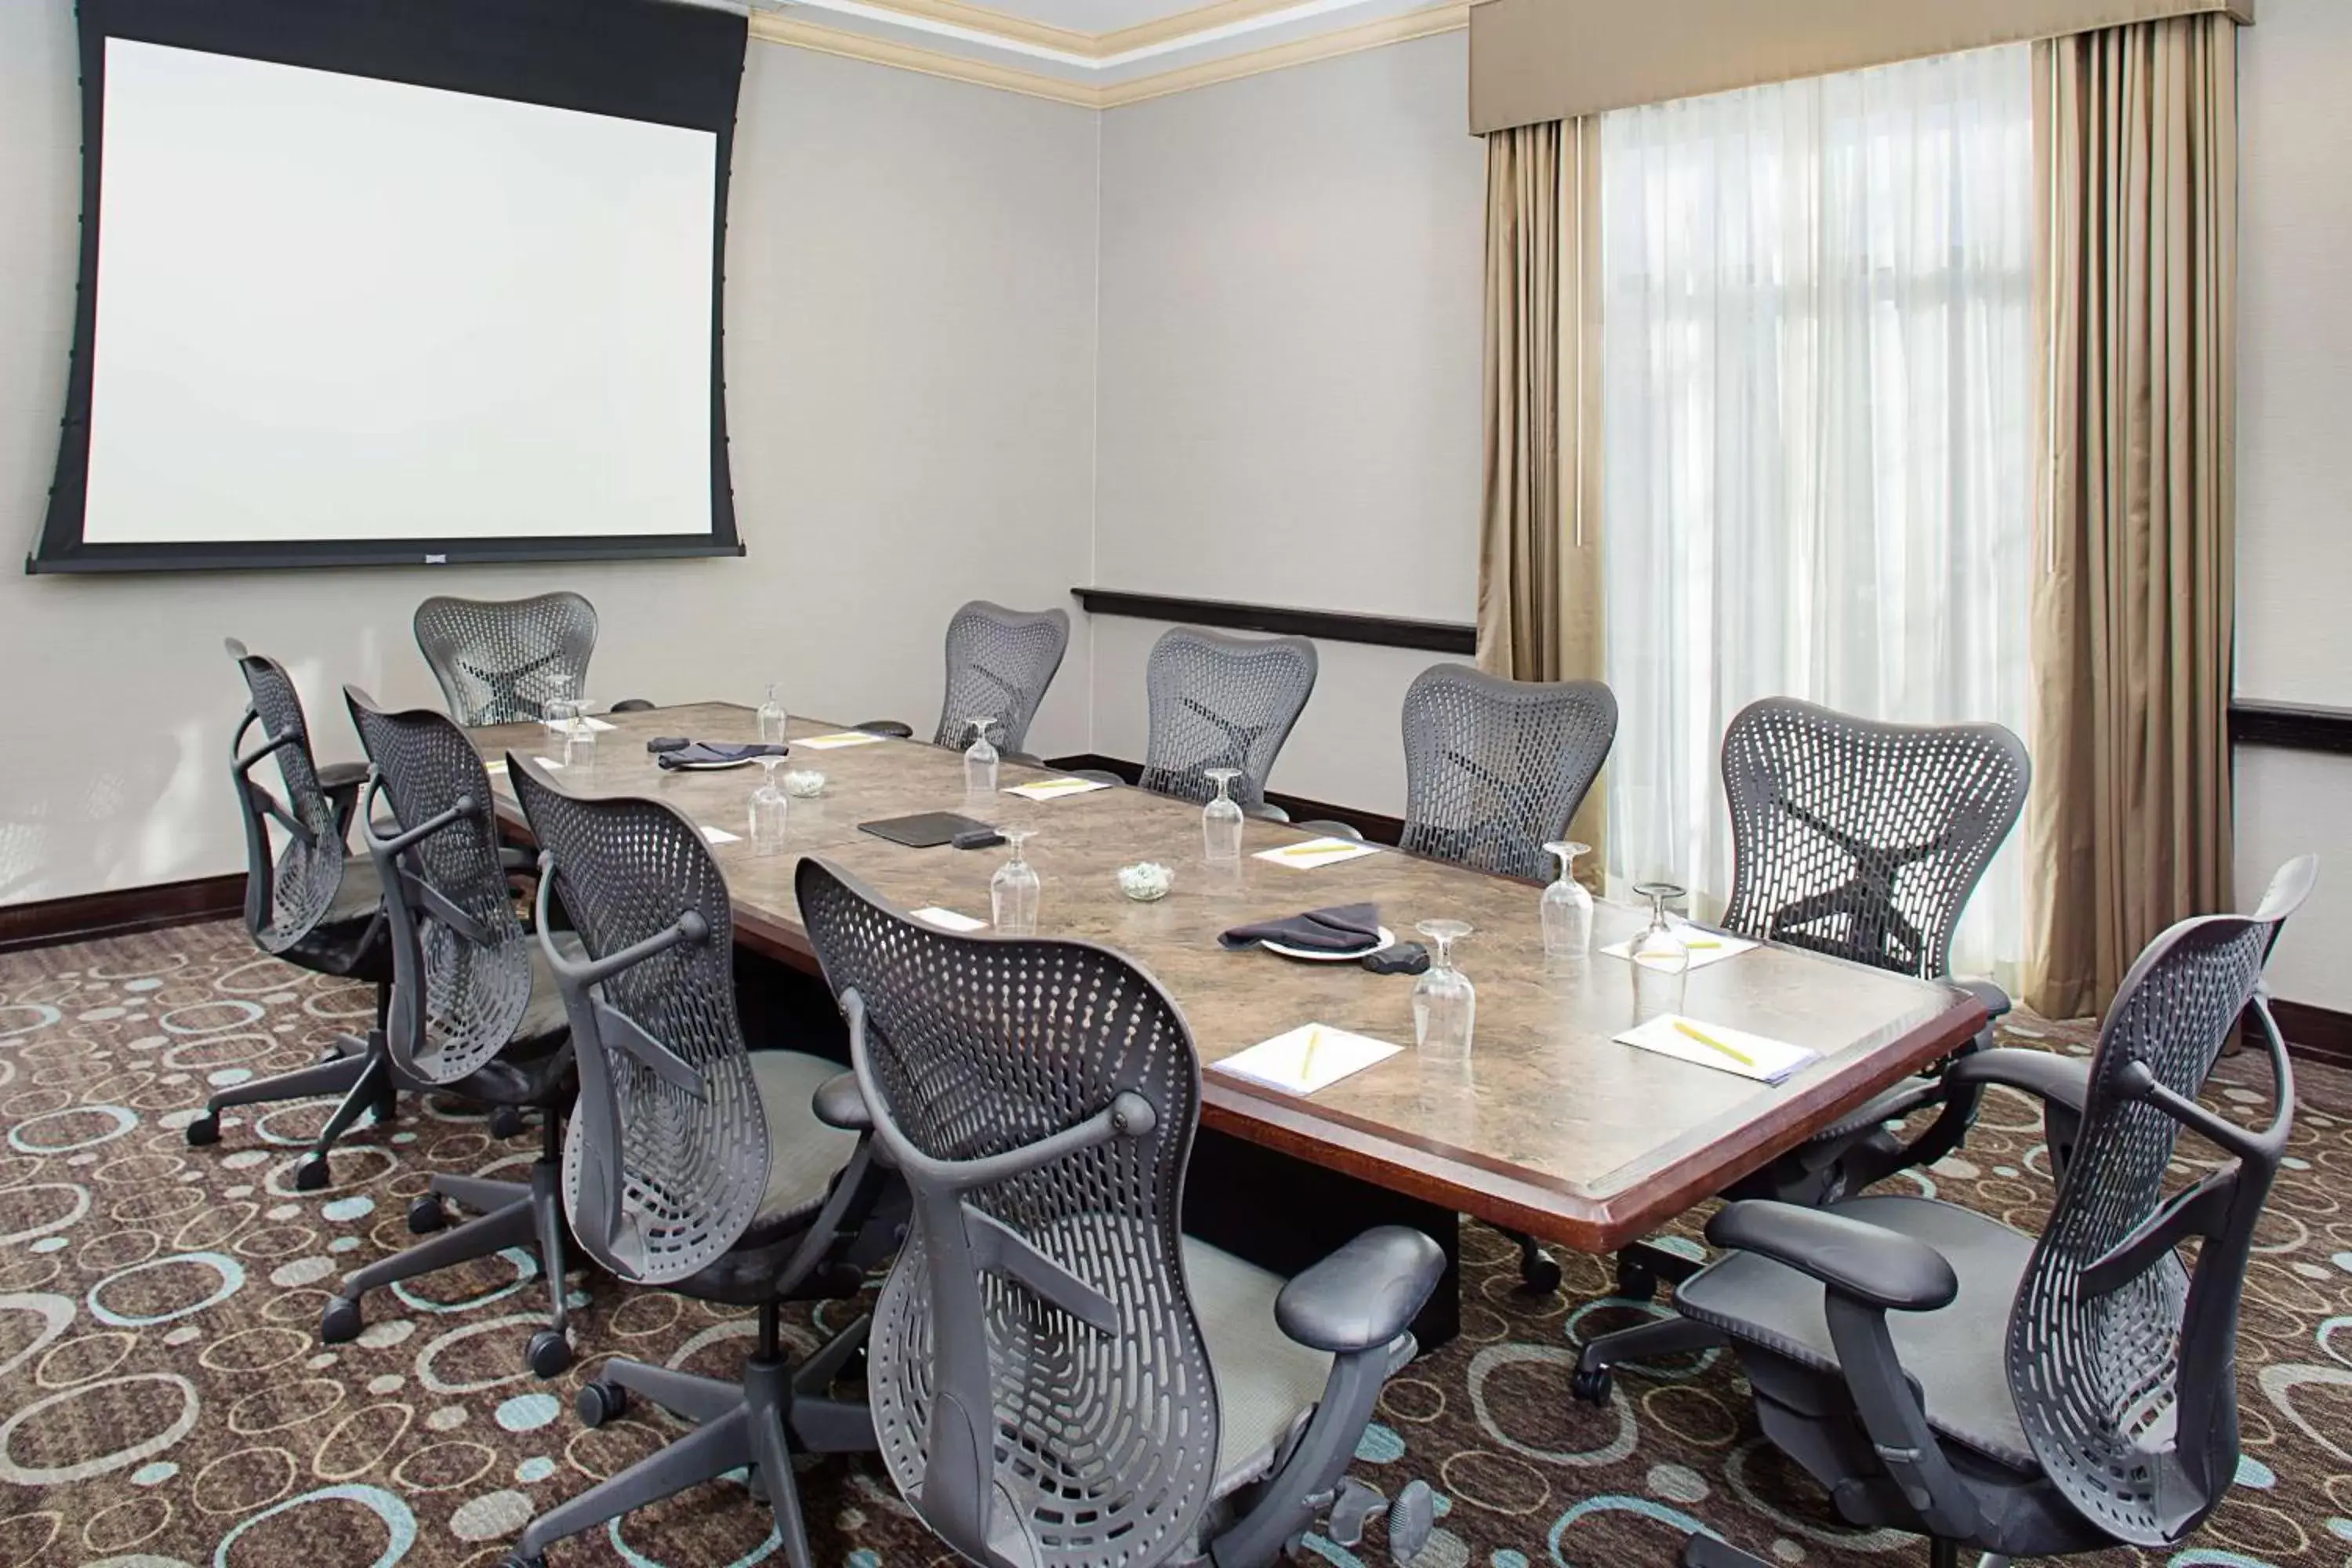 Meeting/conference room, Business Area/Conference Room in Hilton Garden Inn Denver Tech Center